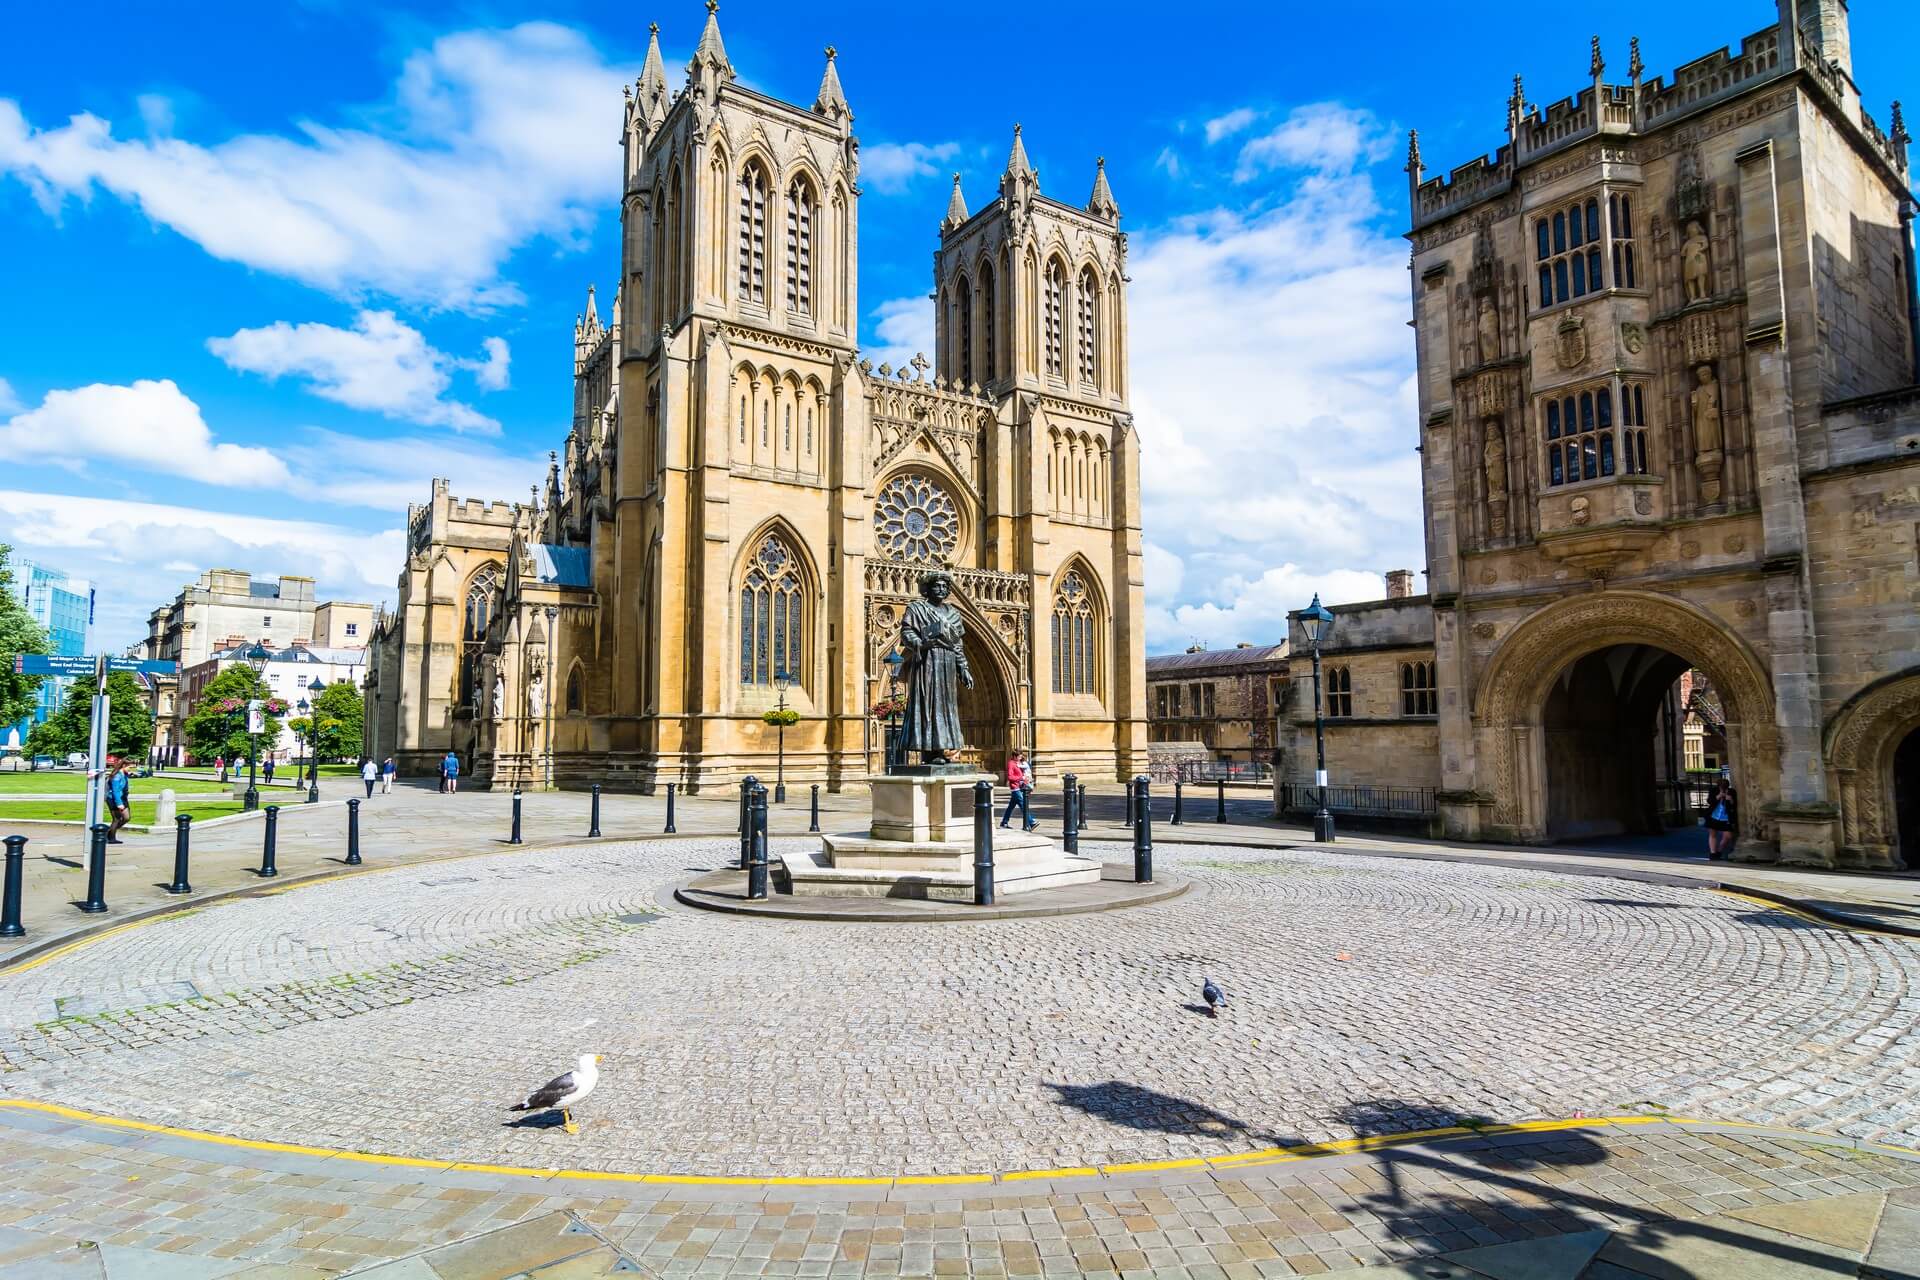 historic sites in the city of Bristol, England
